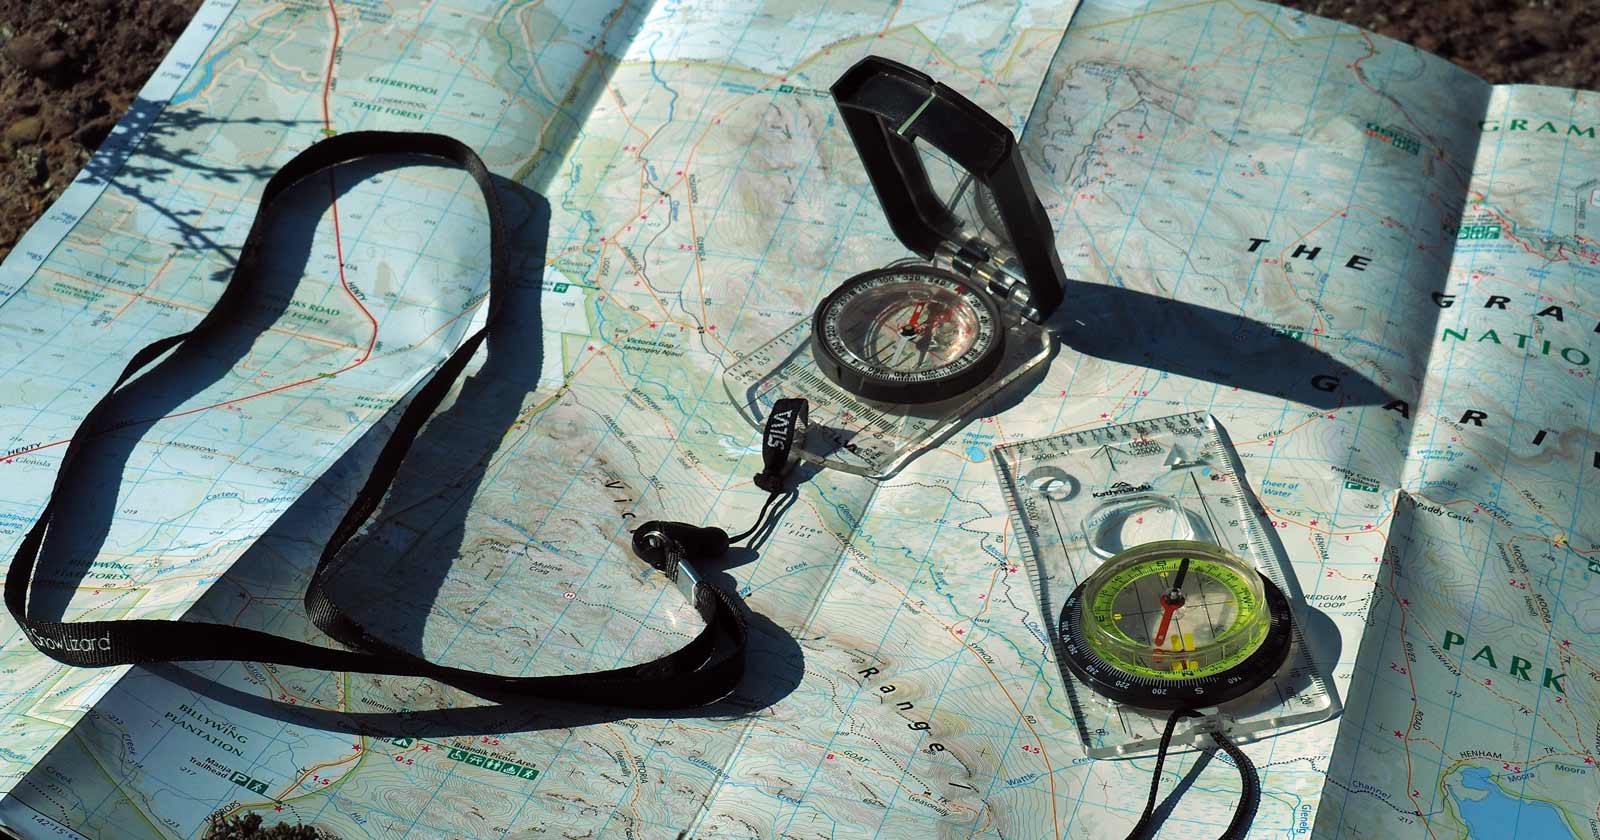 Plan your hike map and compass